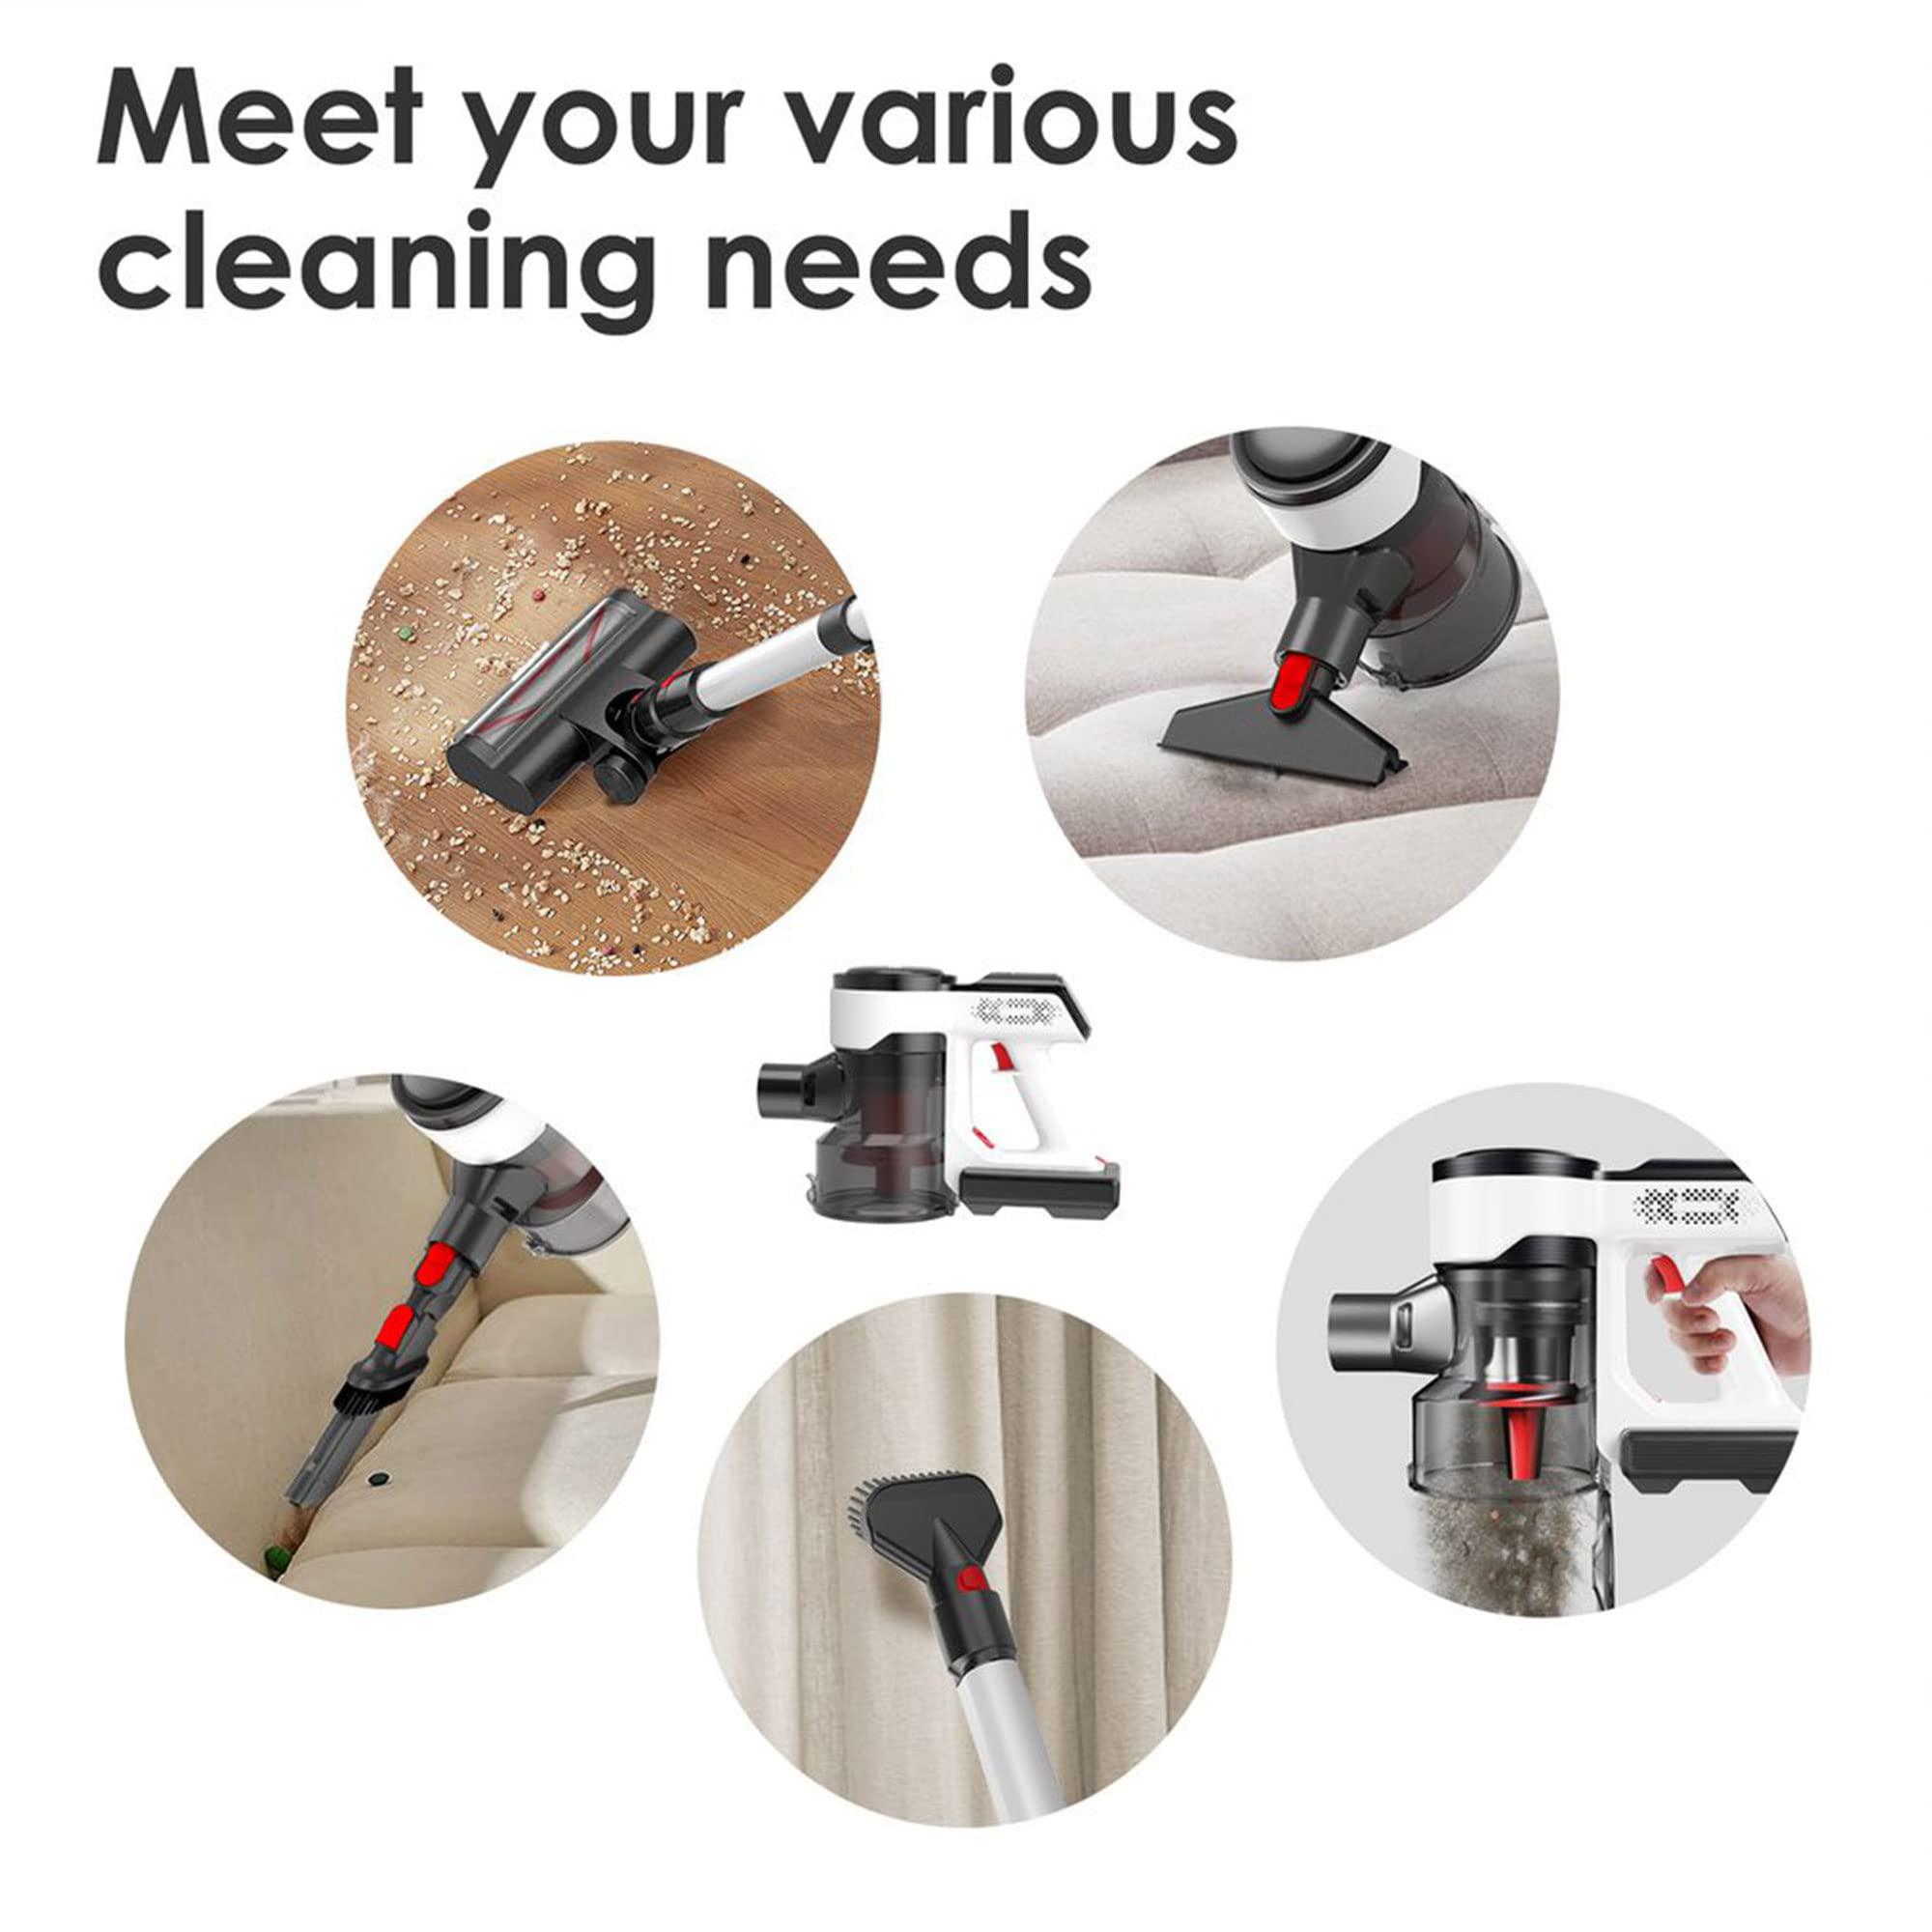 evereze evc3001 cordless stick vacuum with 45 minute runtime, 1.1 qt. large dust cup, 3 in 1 wall mounted accessory storage, 